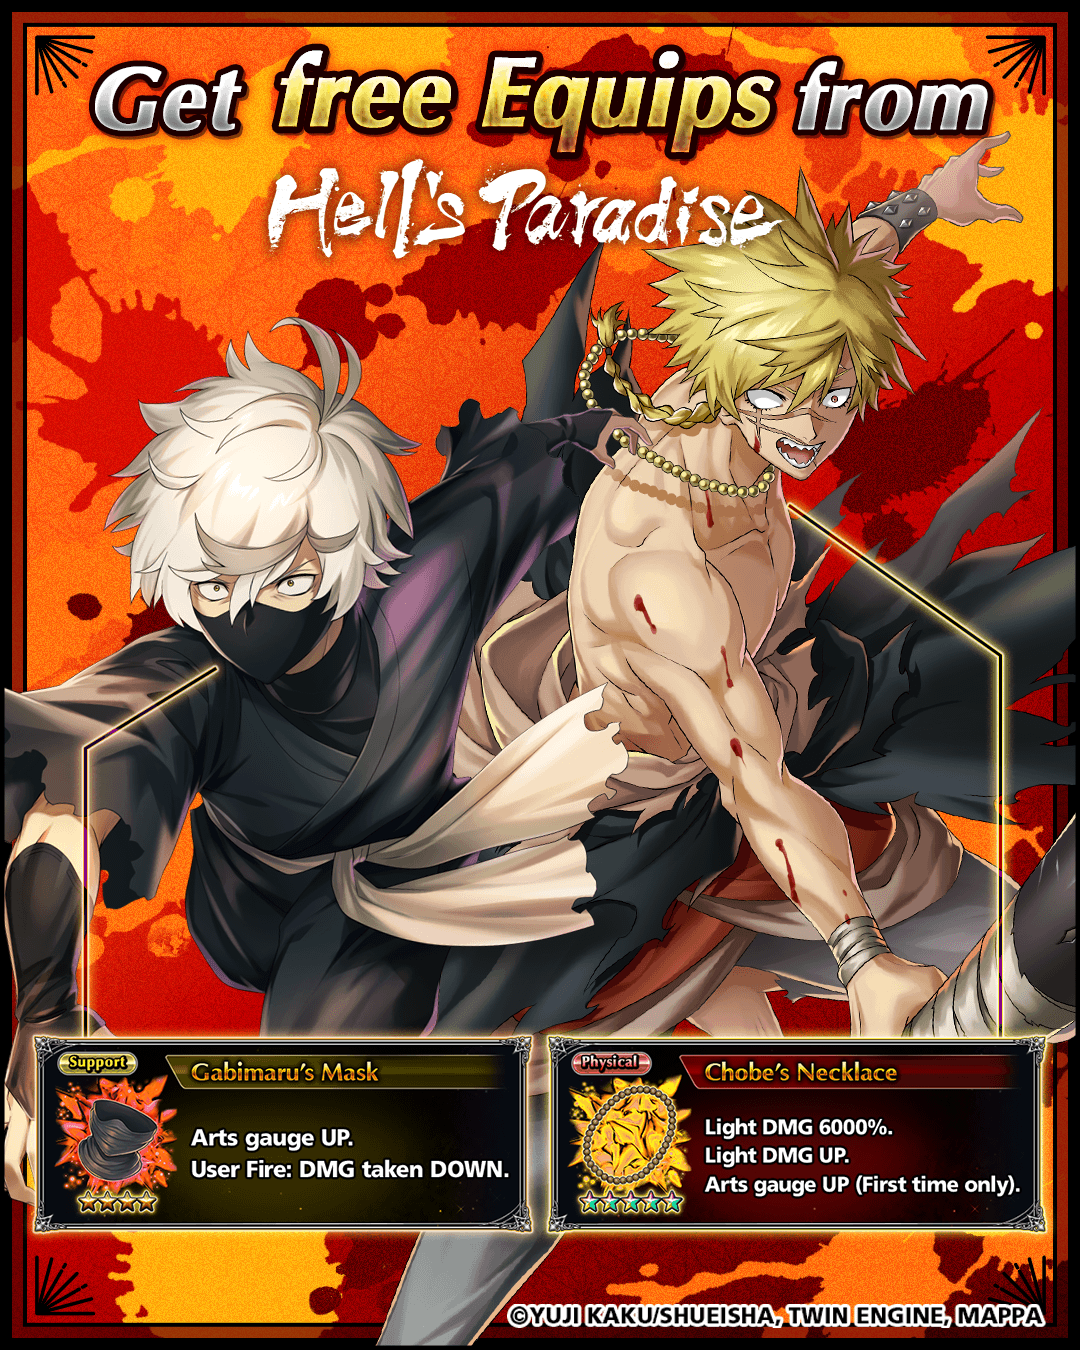 Grand Summoners x Hell's Paradise - Watch the Crossover Intro